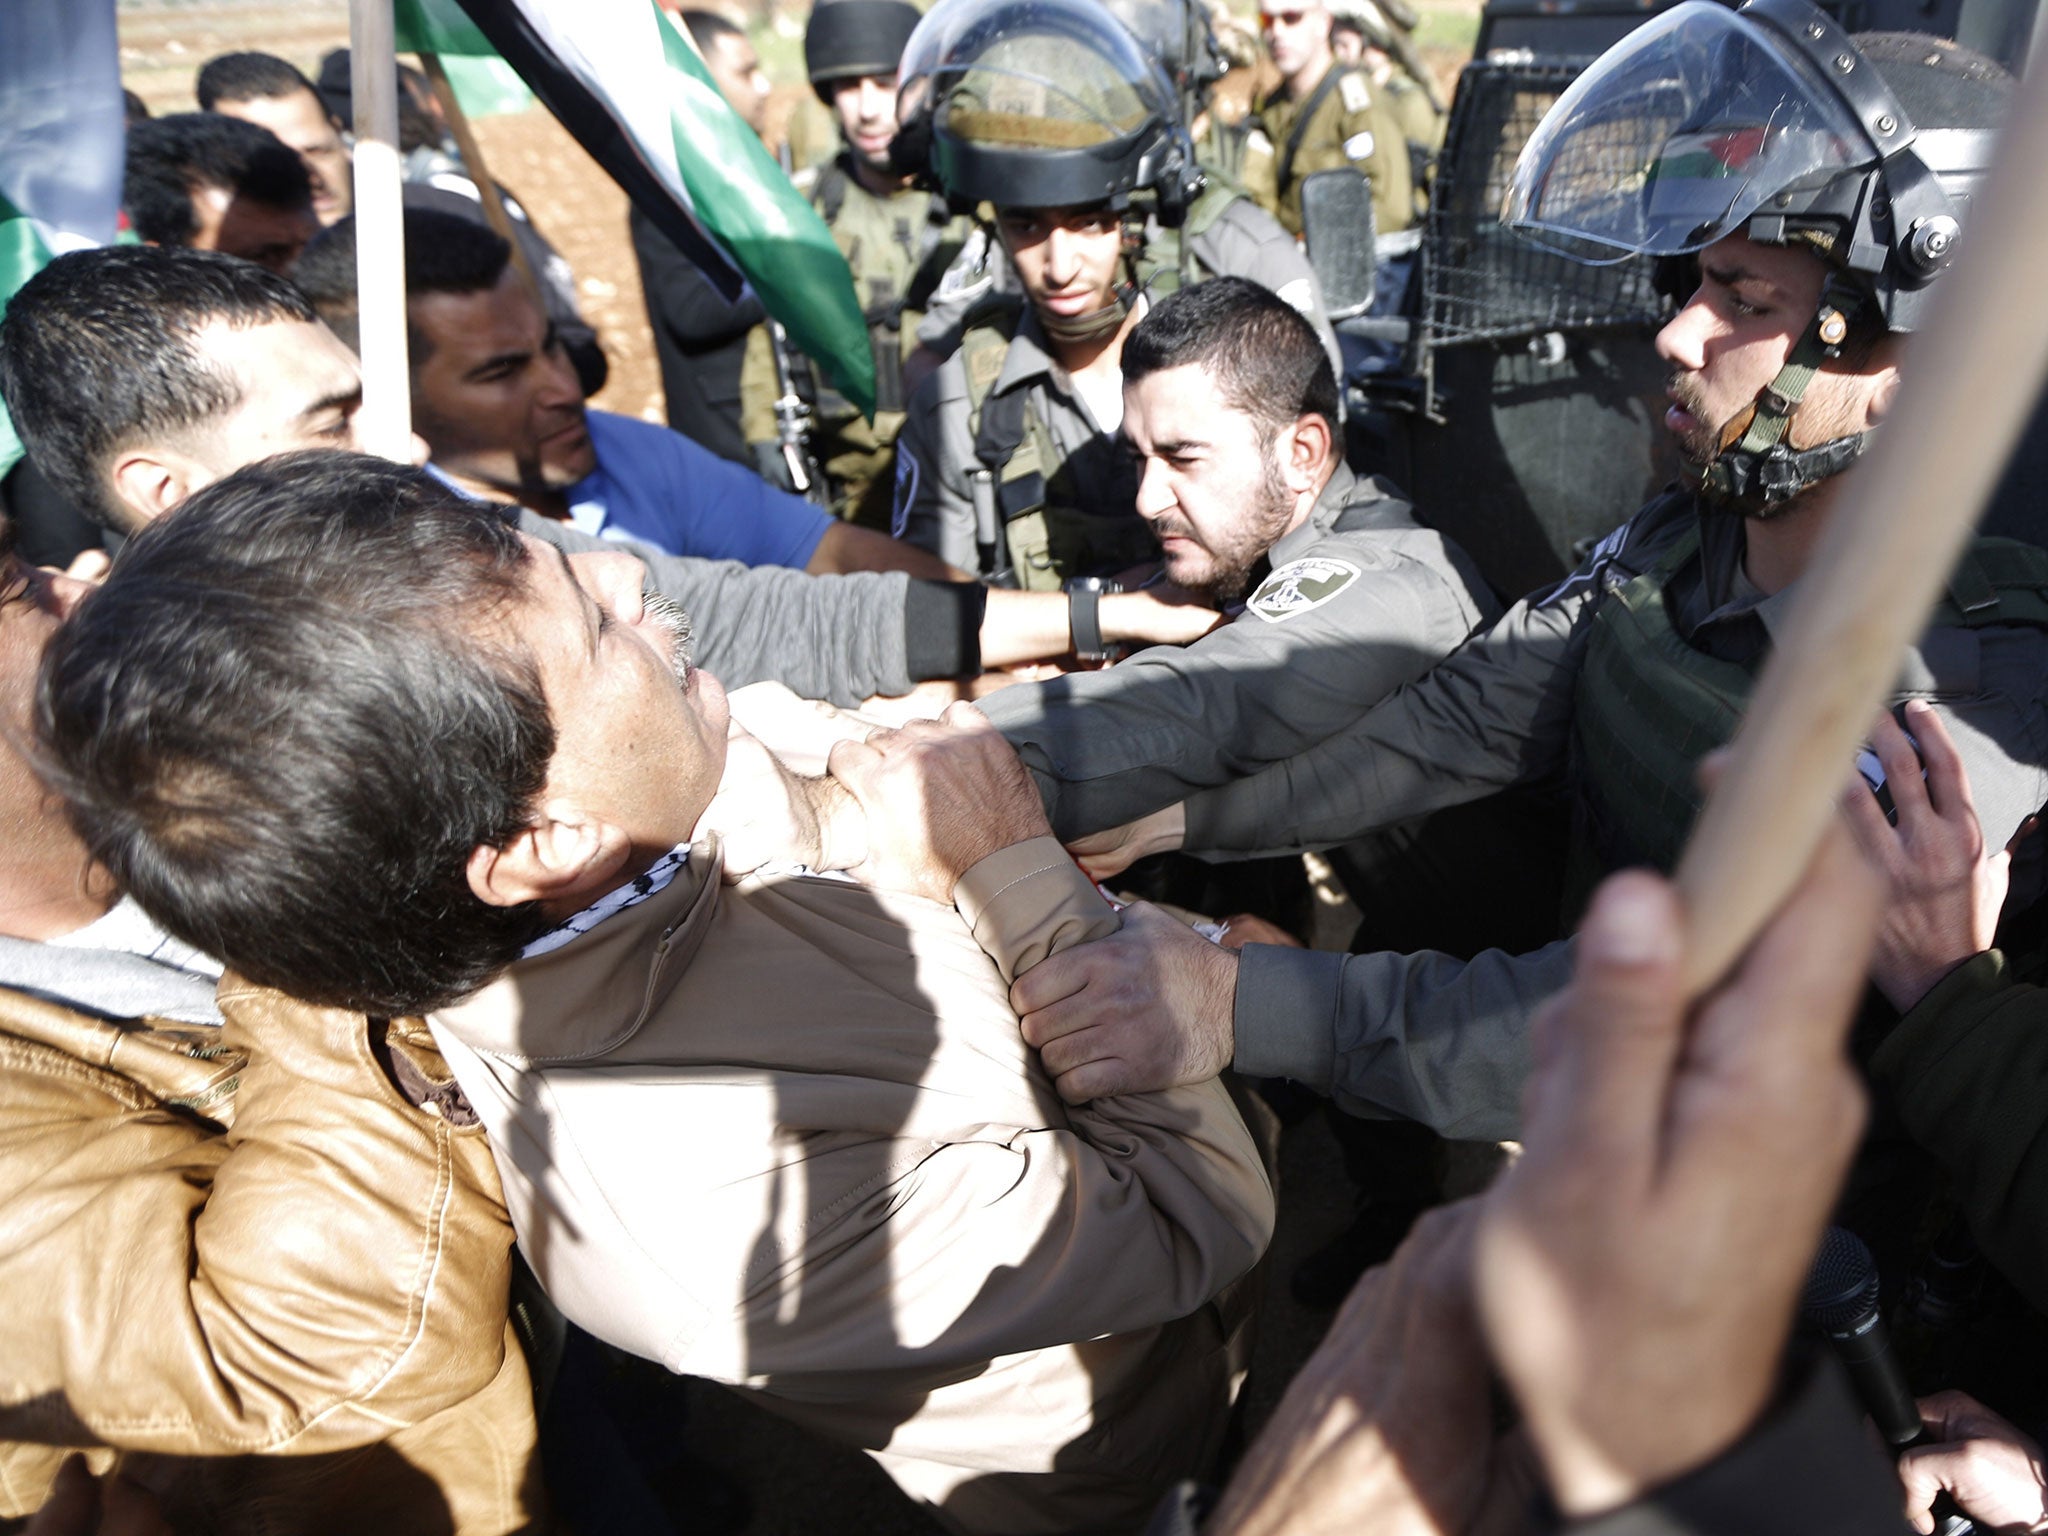 An Israeli border guard grabs Palestinian official Ziad Abu Ein (L) during the demonstration in the village of Turmus Aya near Ramallah, on December 10, 2014